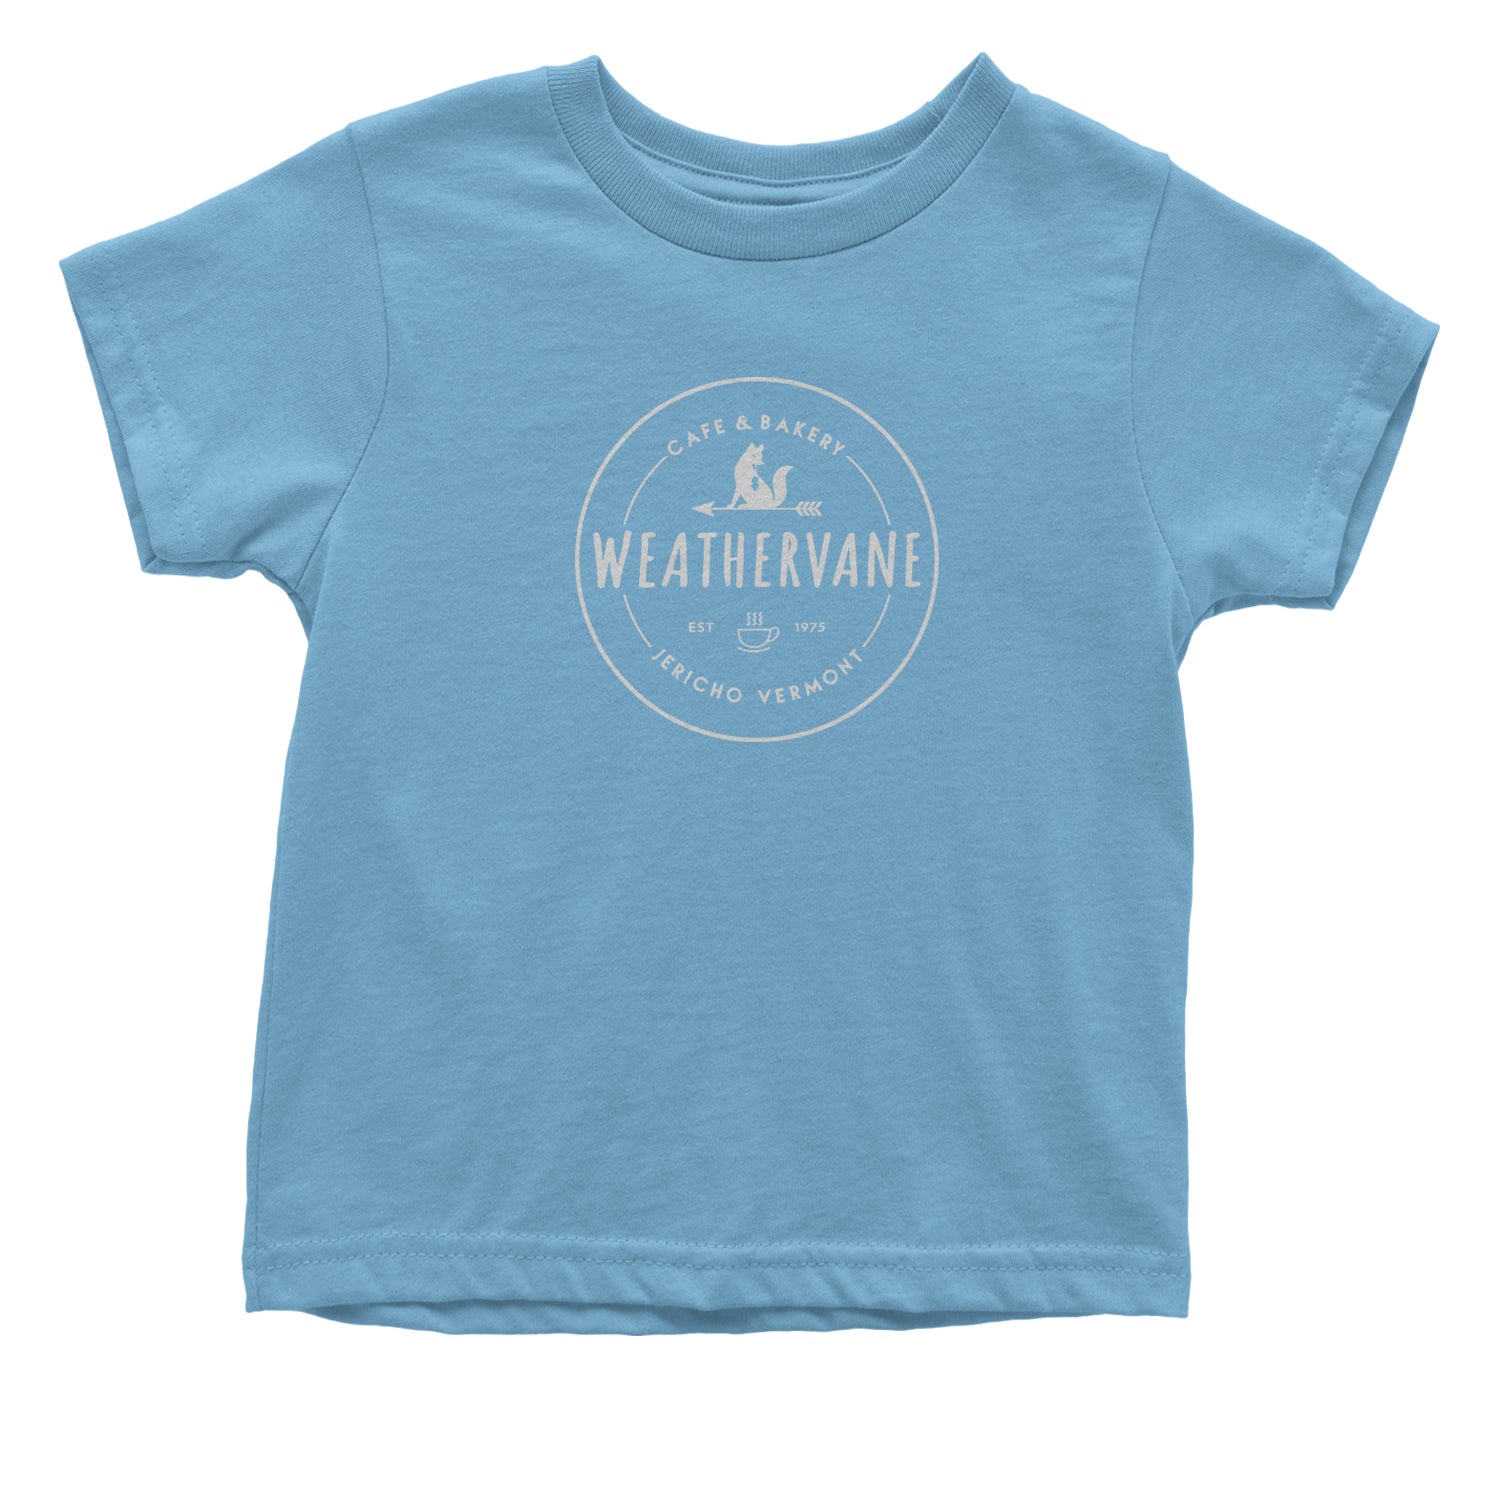 Weathervane Coffee Shop Infant One-Piece Romper Bodysuit and Toddler T-shirt academy, jericho, more, never, vermont, Wednesday by Expression Tees